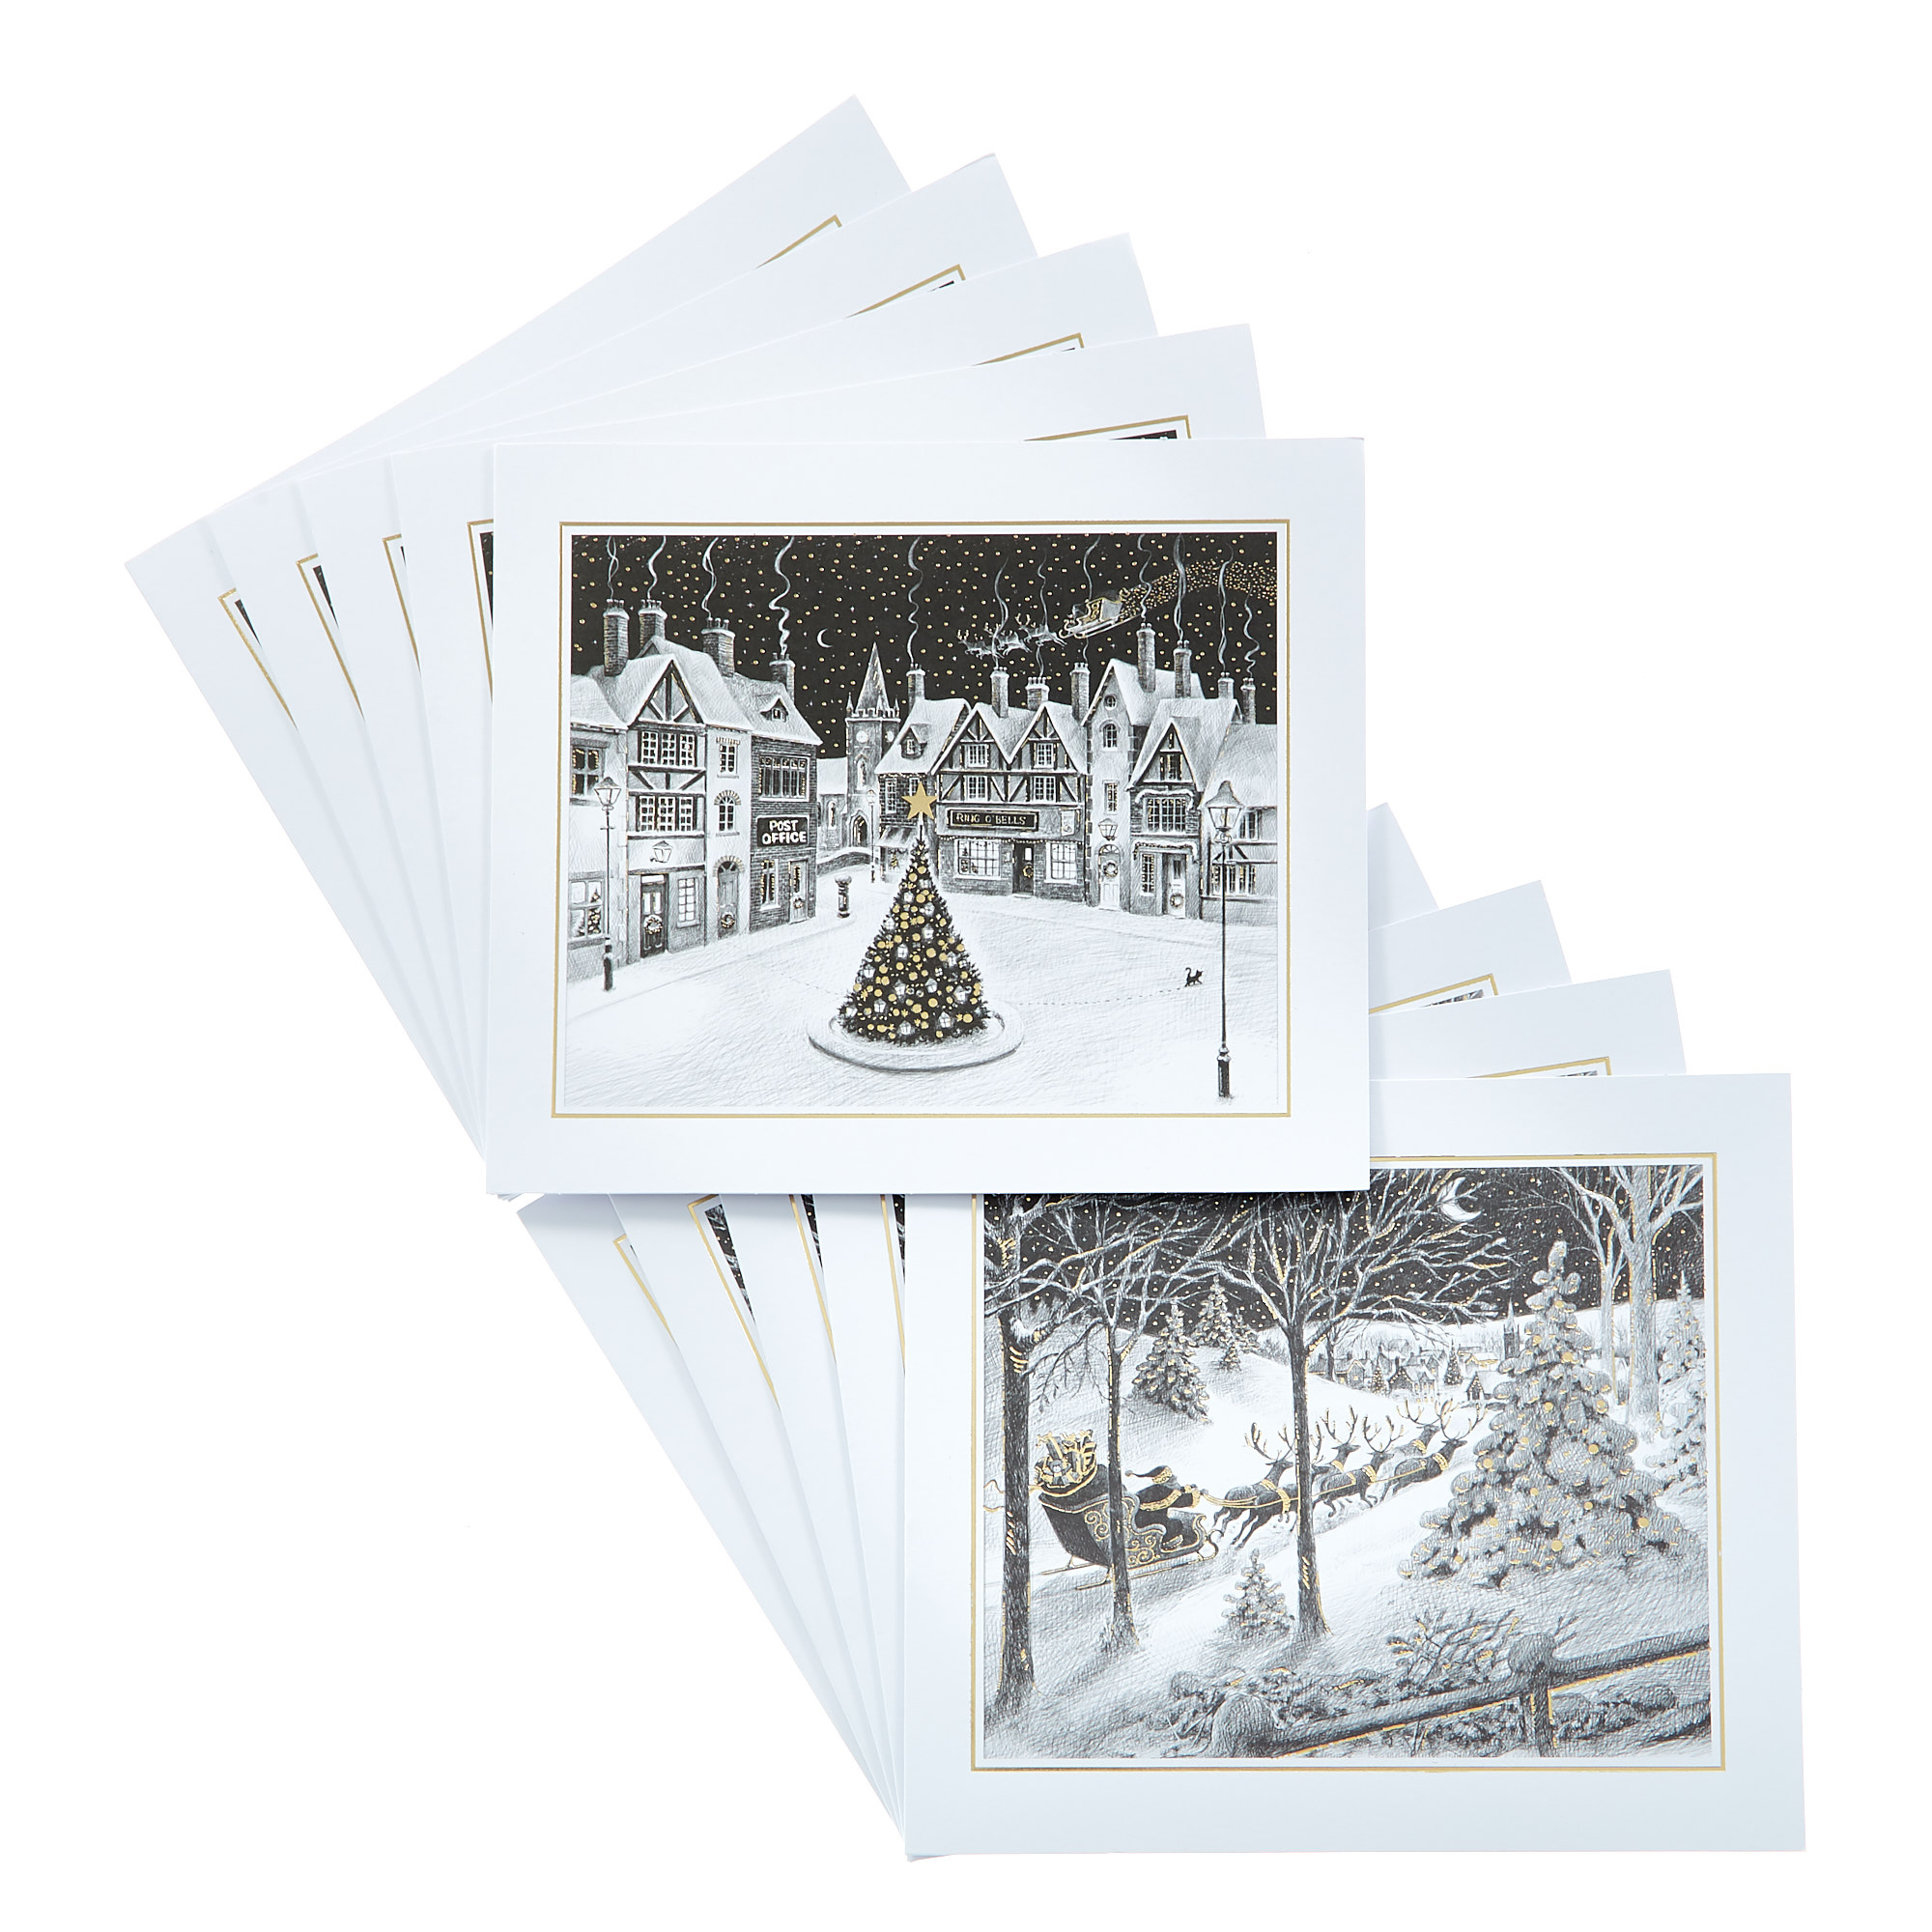 Buy Box of 12 Deluxe Landscape Village Charity Christmas Cards - 2 Designs for GBP 3.99 | Card ...